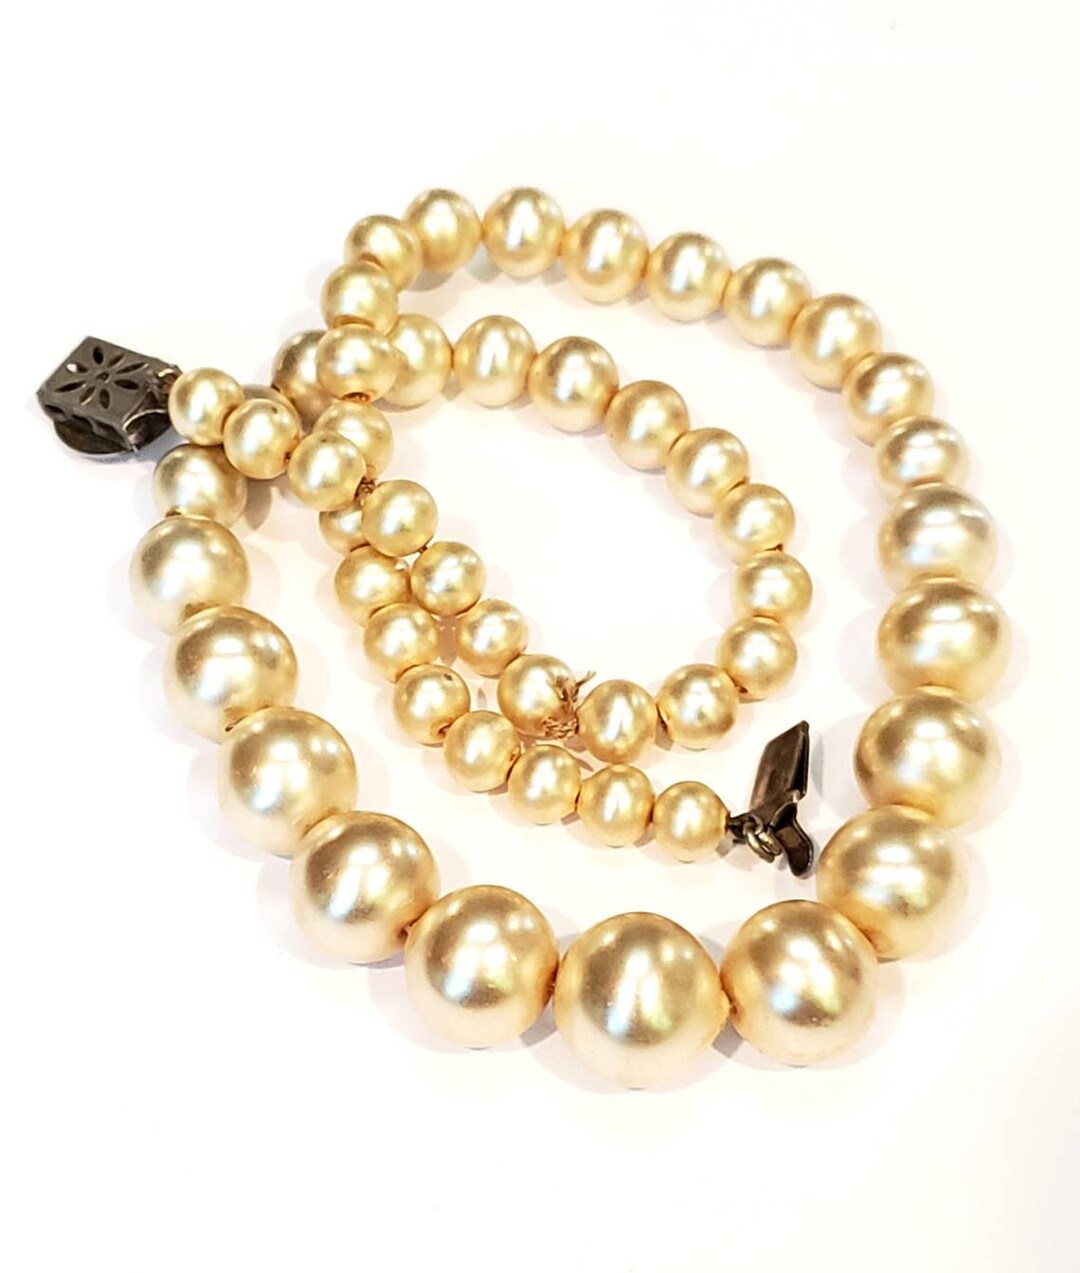 Vintage Pearl Necklace Sterling Clasp Faux Pearl Coated Agates - Etsy